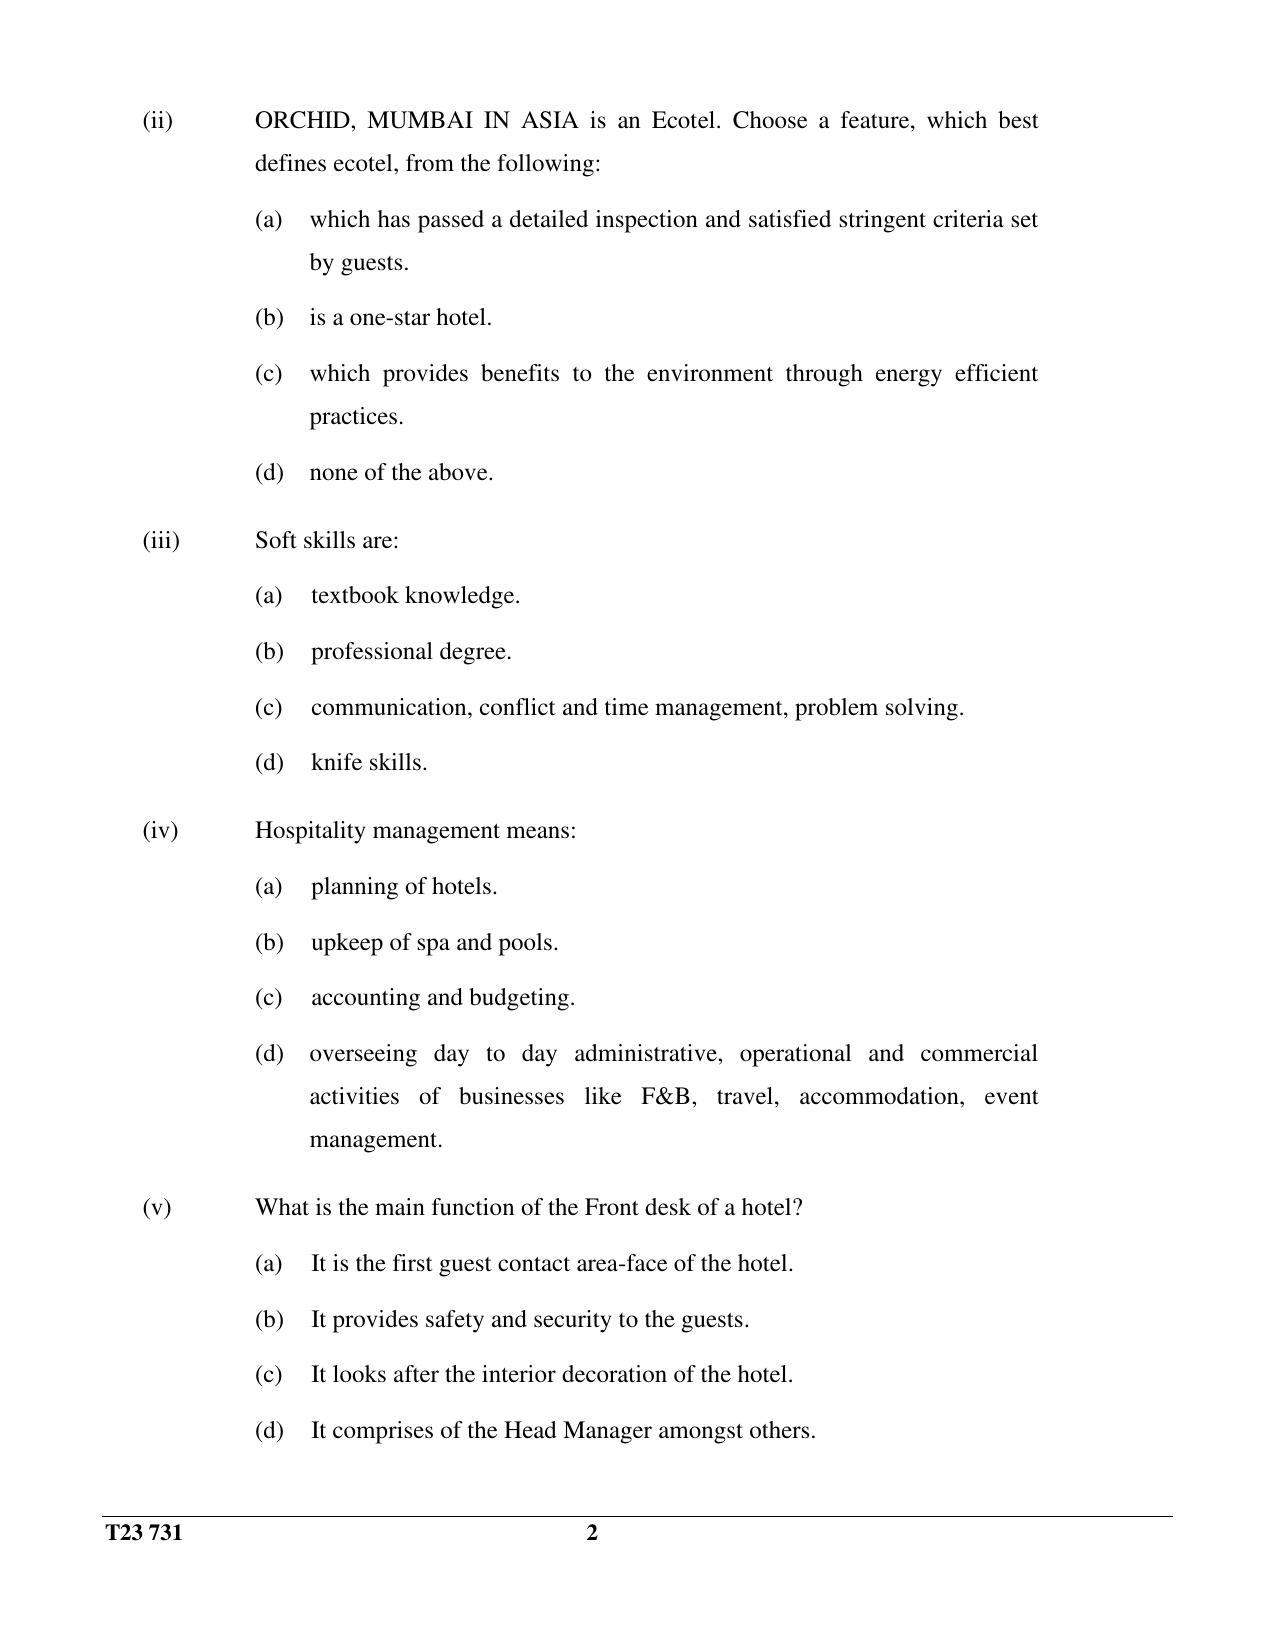 ICSE Class 10 HOSPITALITY MANAGEMENT 2023 Question Paper - Page 2